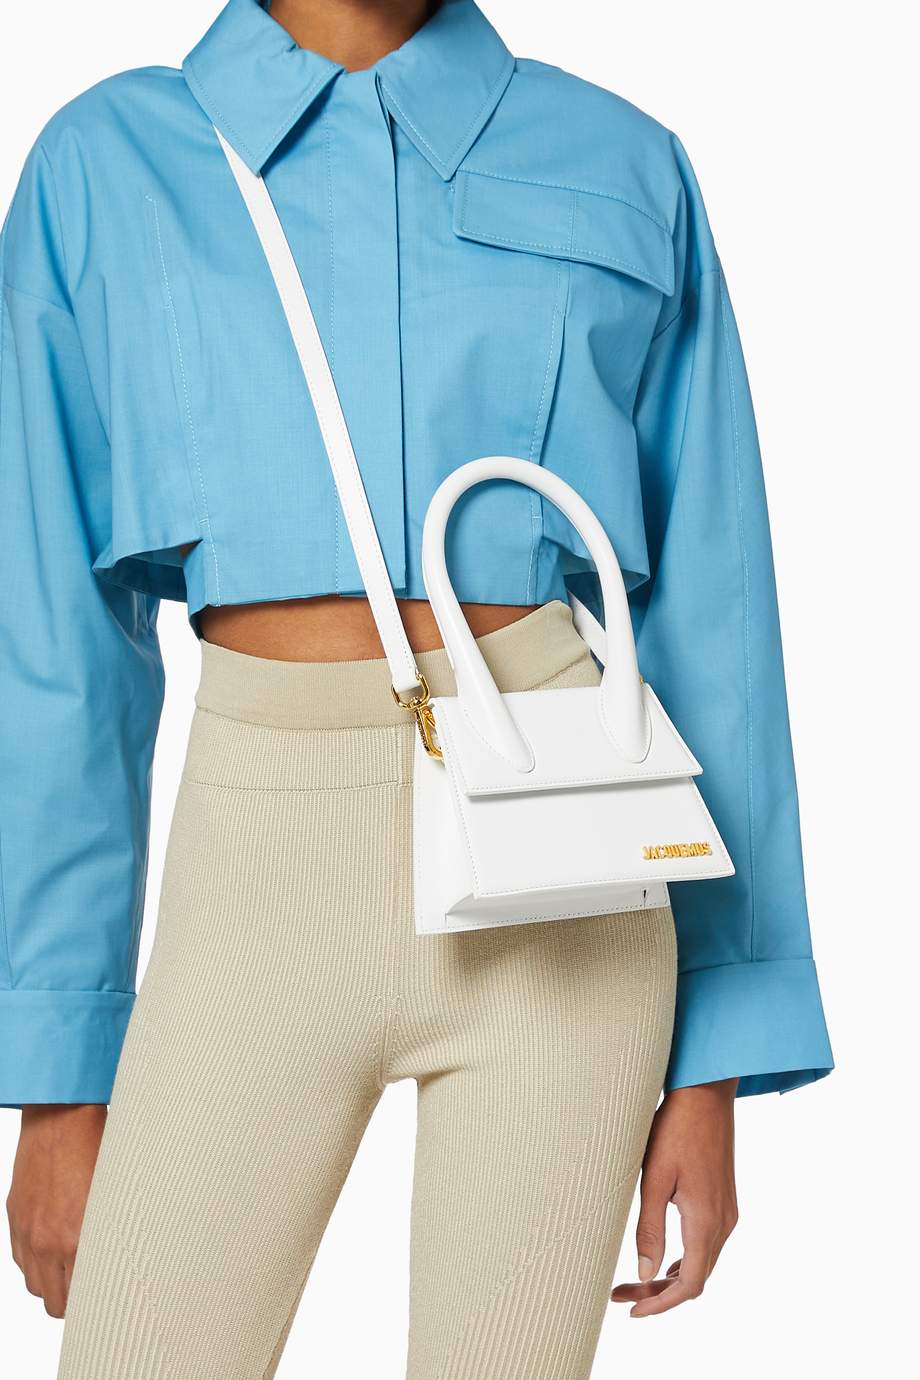 Shop Jacquemus White Le Chiquito Moyen Small Bag in Leather for Women ...